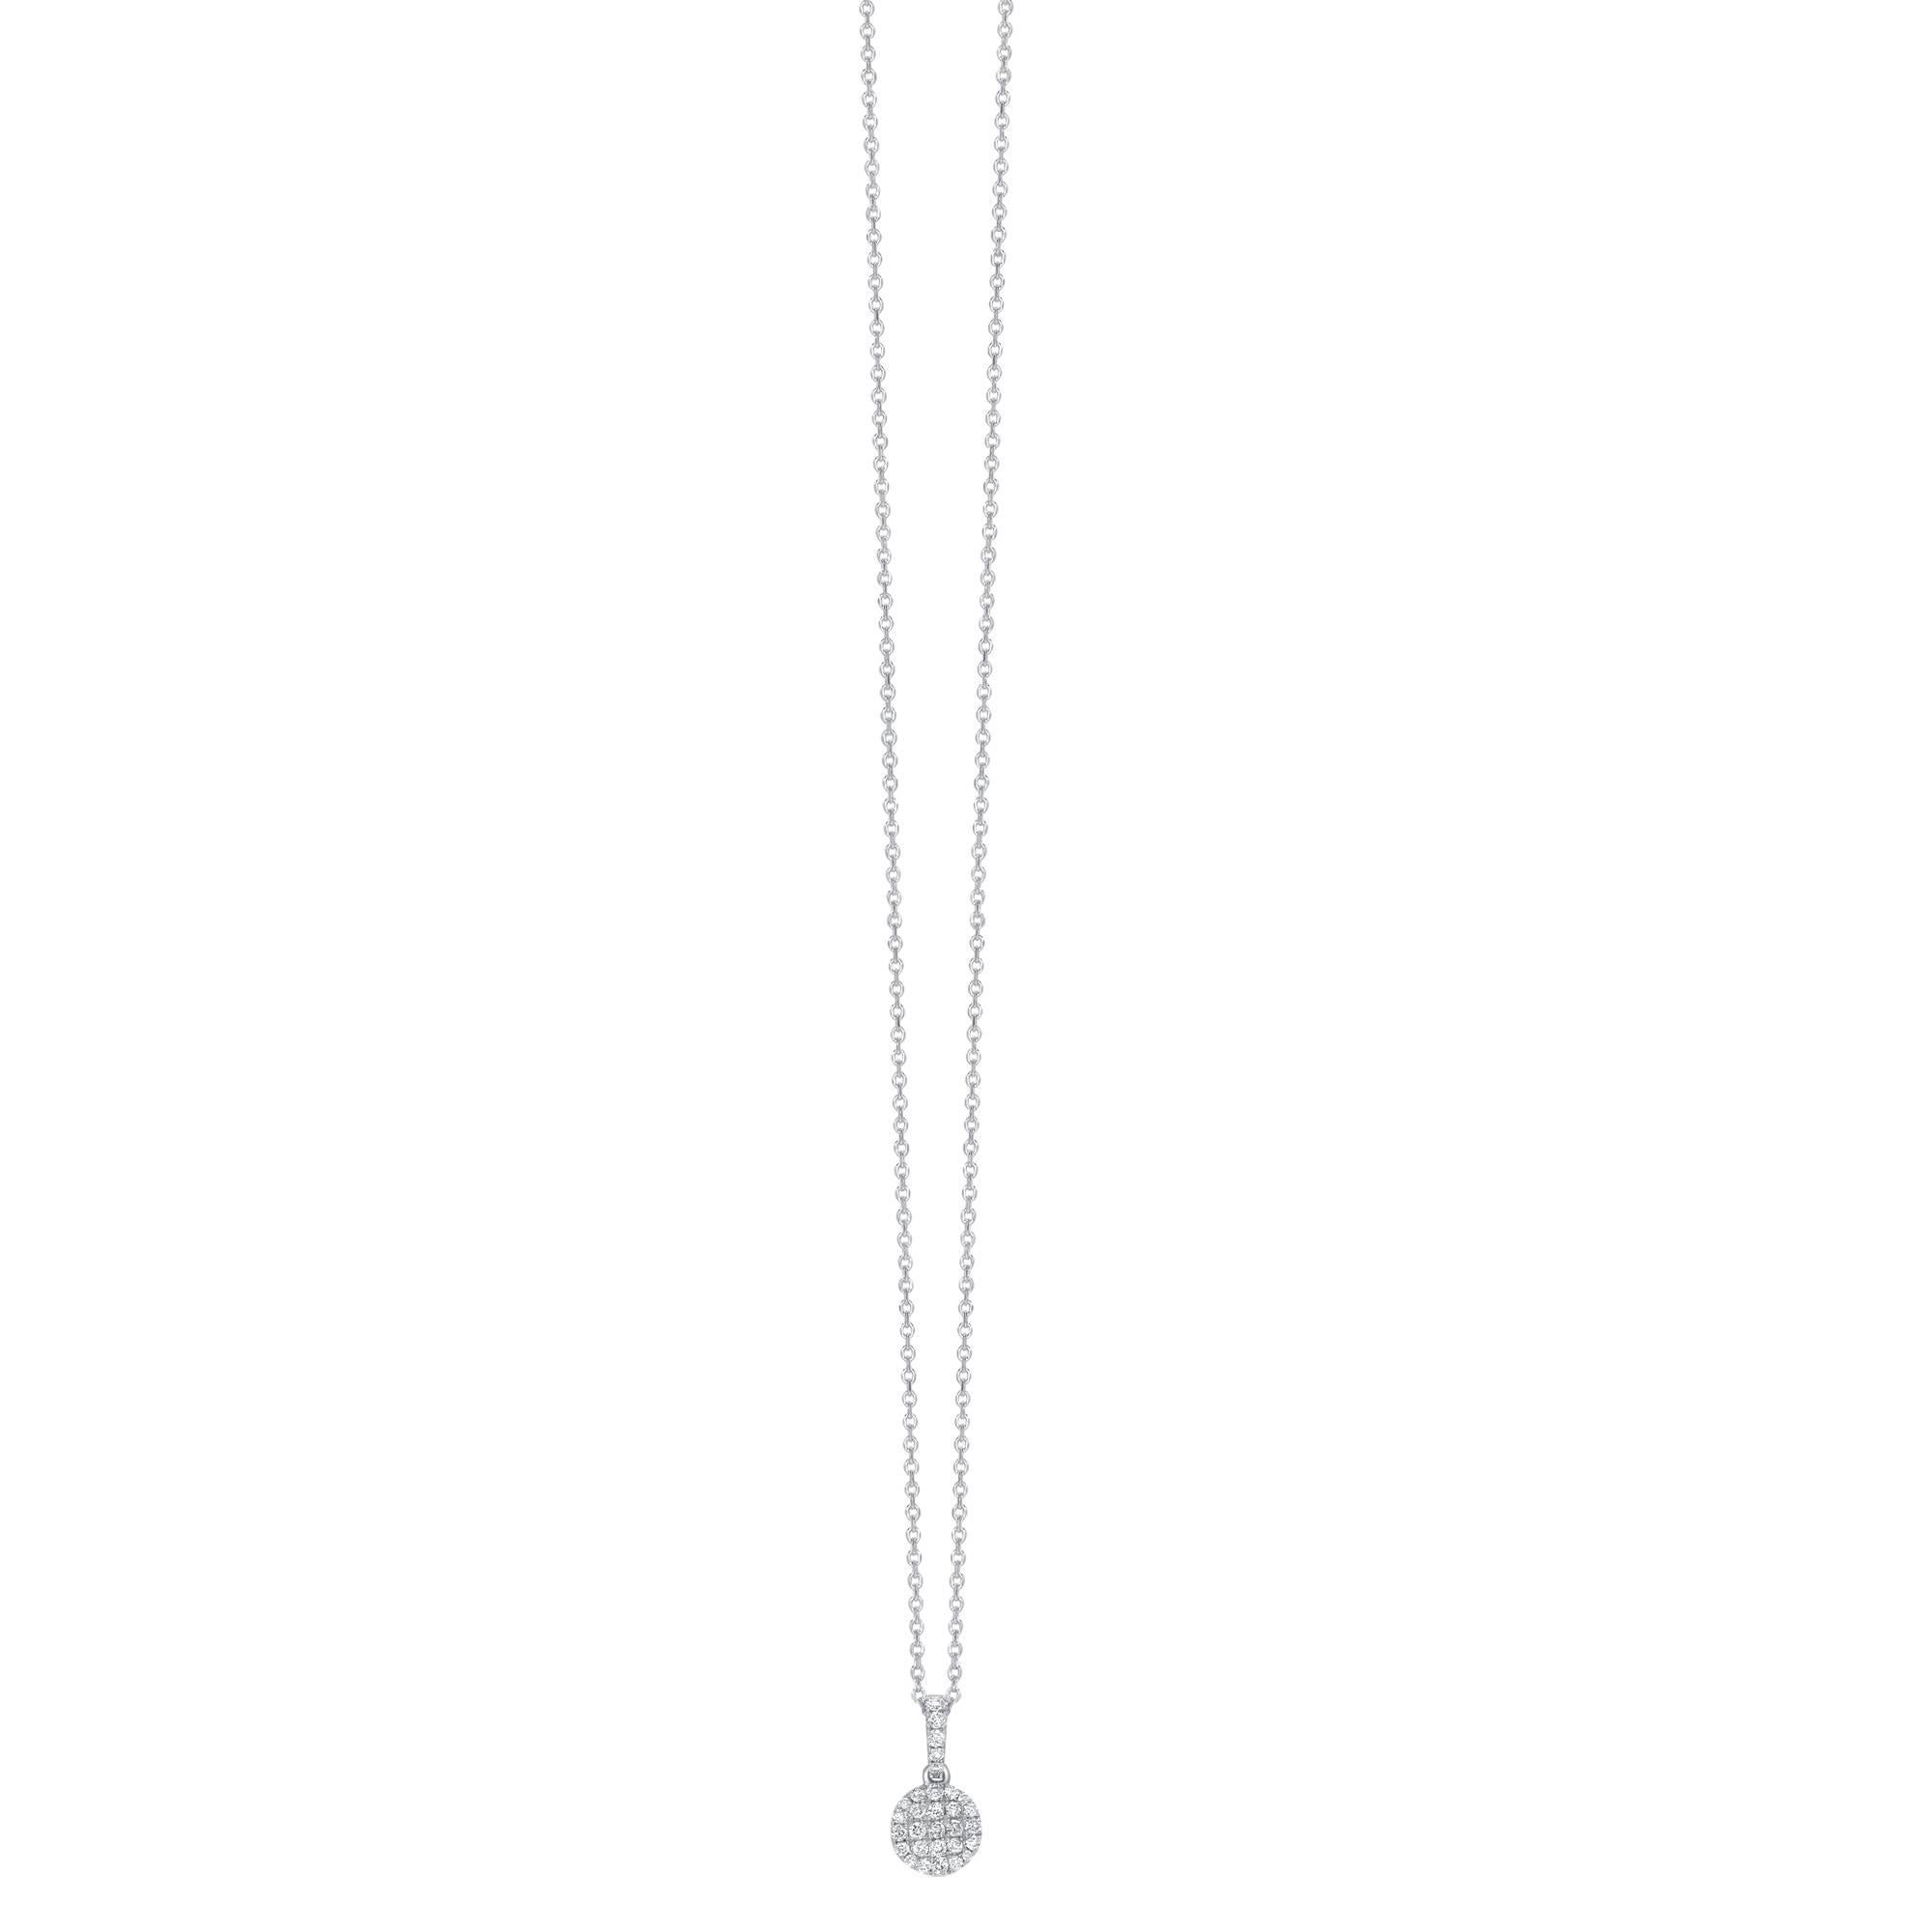 This delicate 7mm round brilliant Diamond button shaped pendant glistens with the Diamonds highlighted by the 18 Karat White Gold setting. H-SI white diamonds in a round cluster with a pave set on the chain connector. The total Diamond weight of the